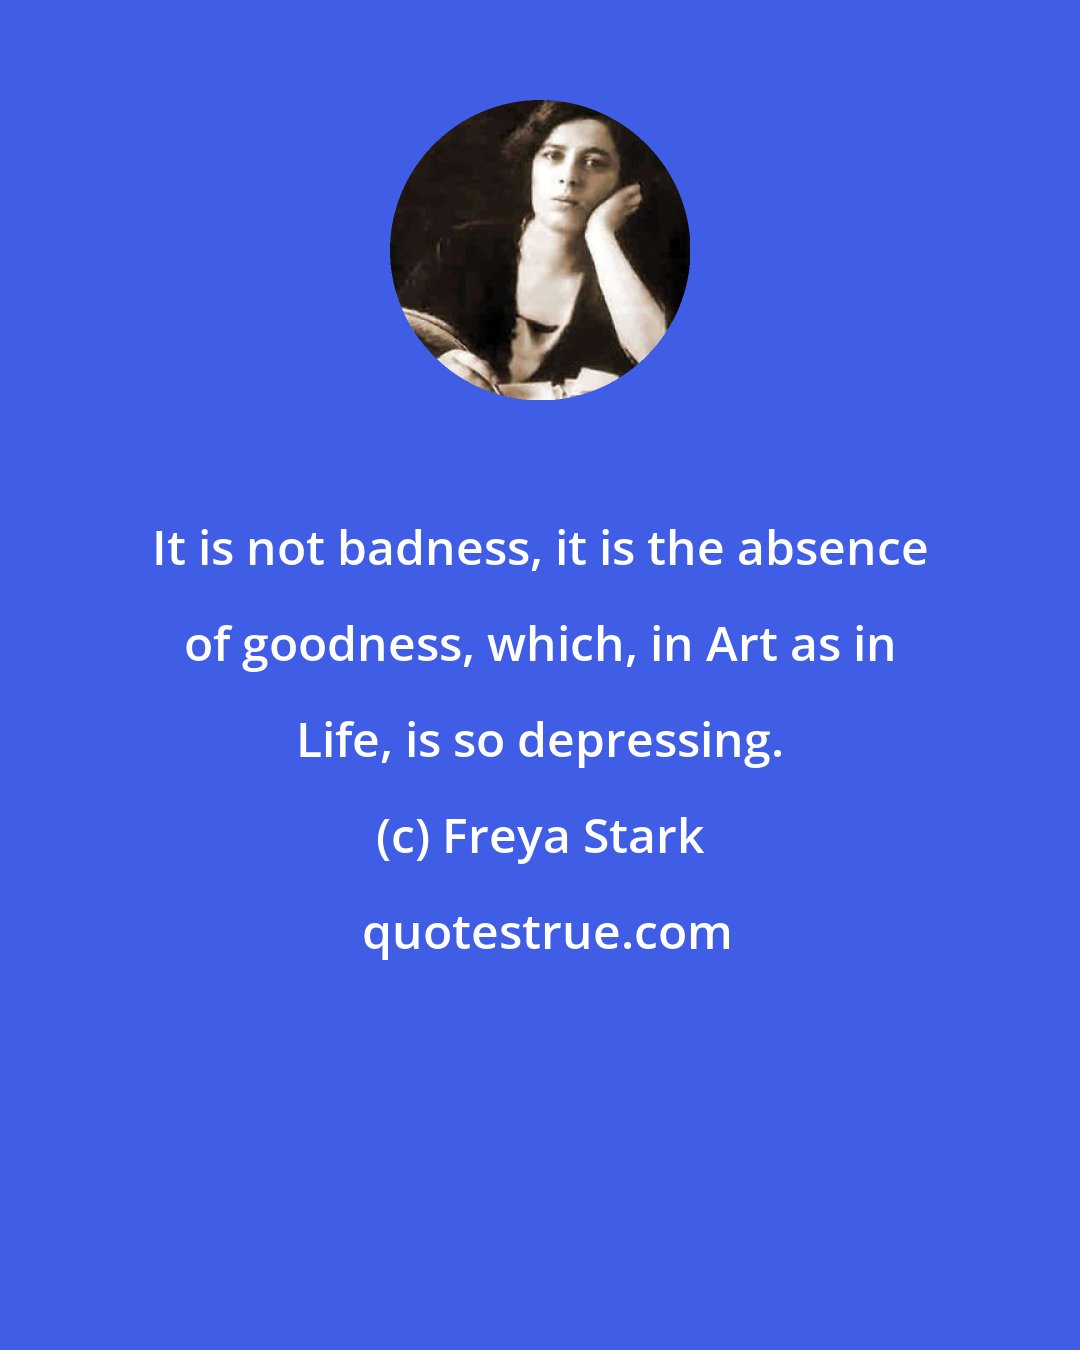 Freya Stark: It is not badness, it is the absence of goodness, which, in Art as in Life, is so depressing.